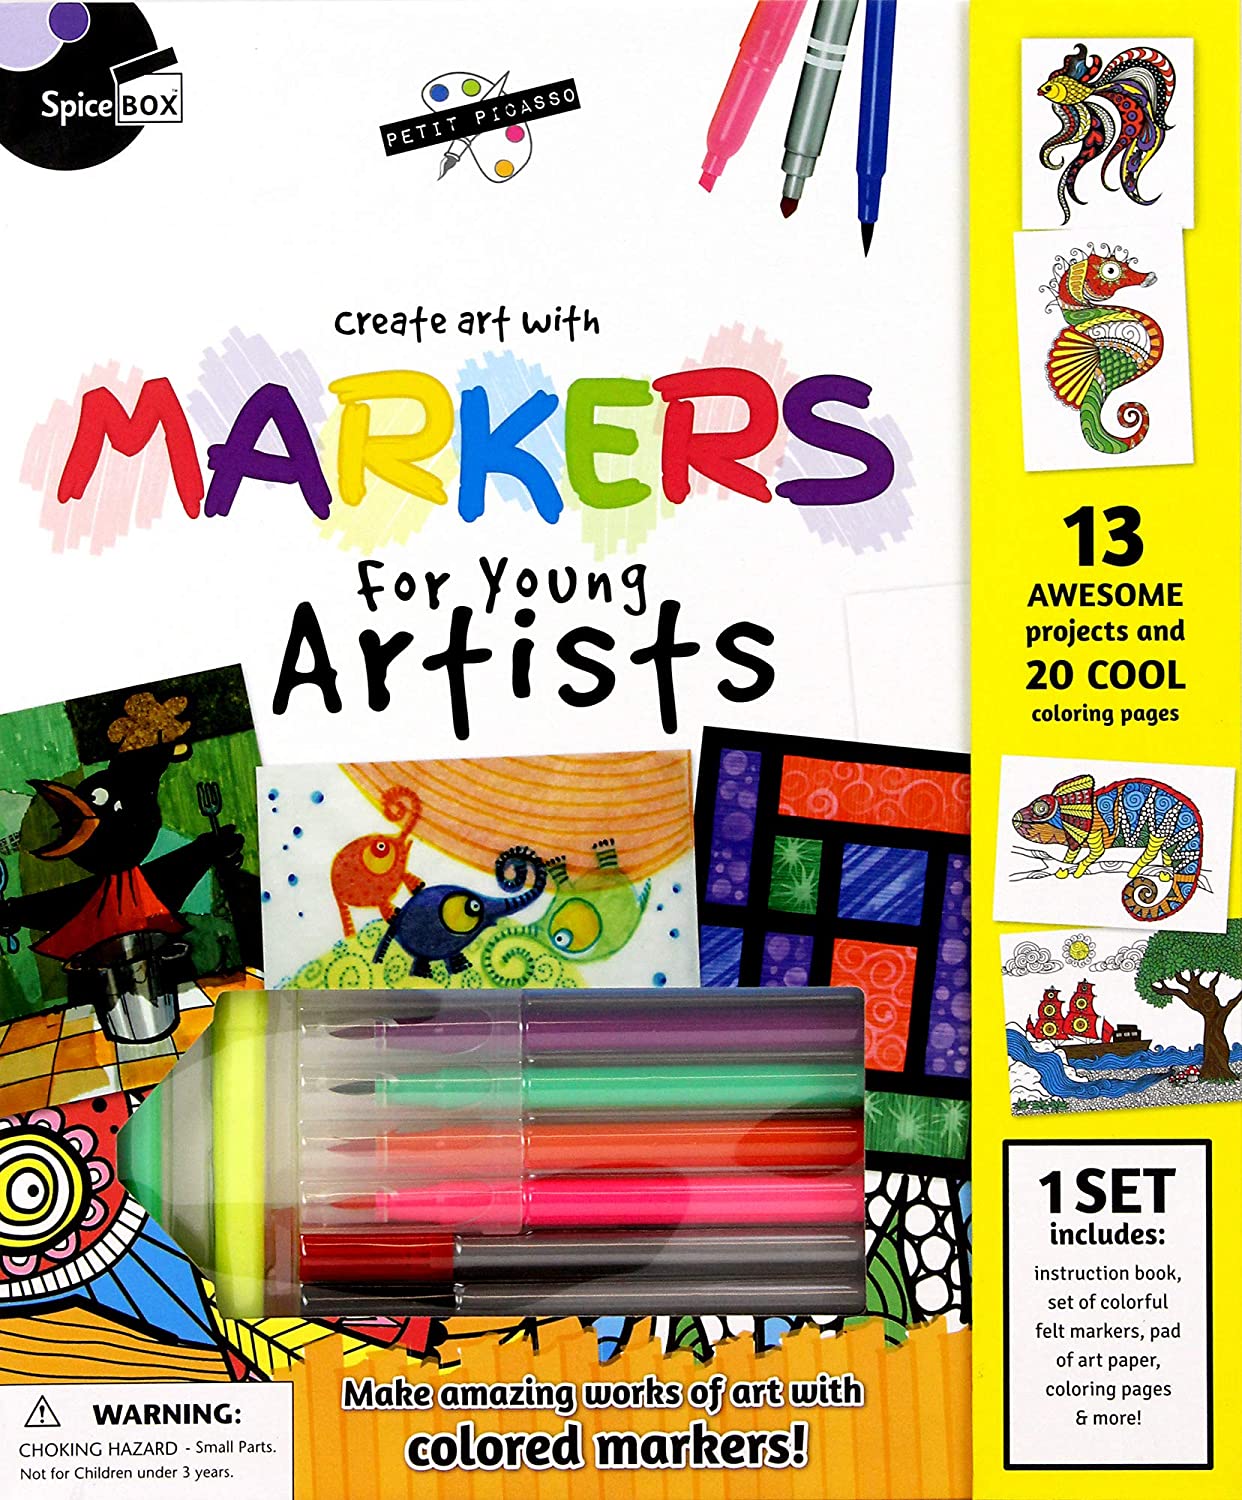 Spice Box Petit Picasso Markers for Young Artists